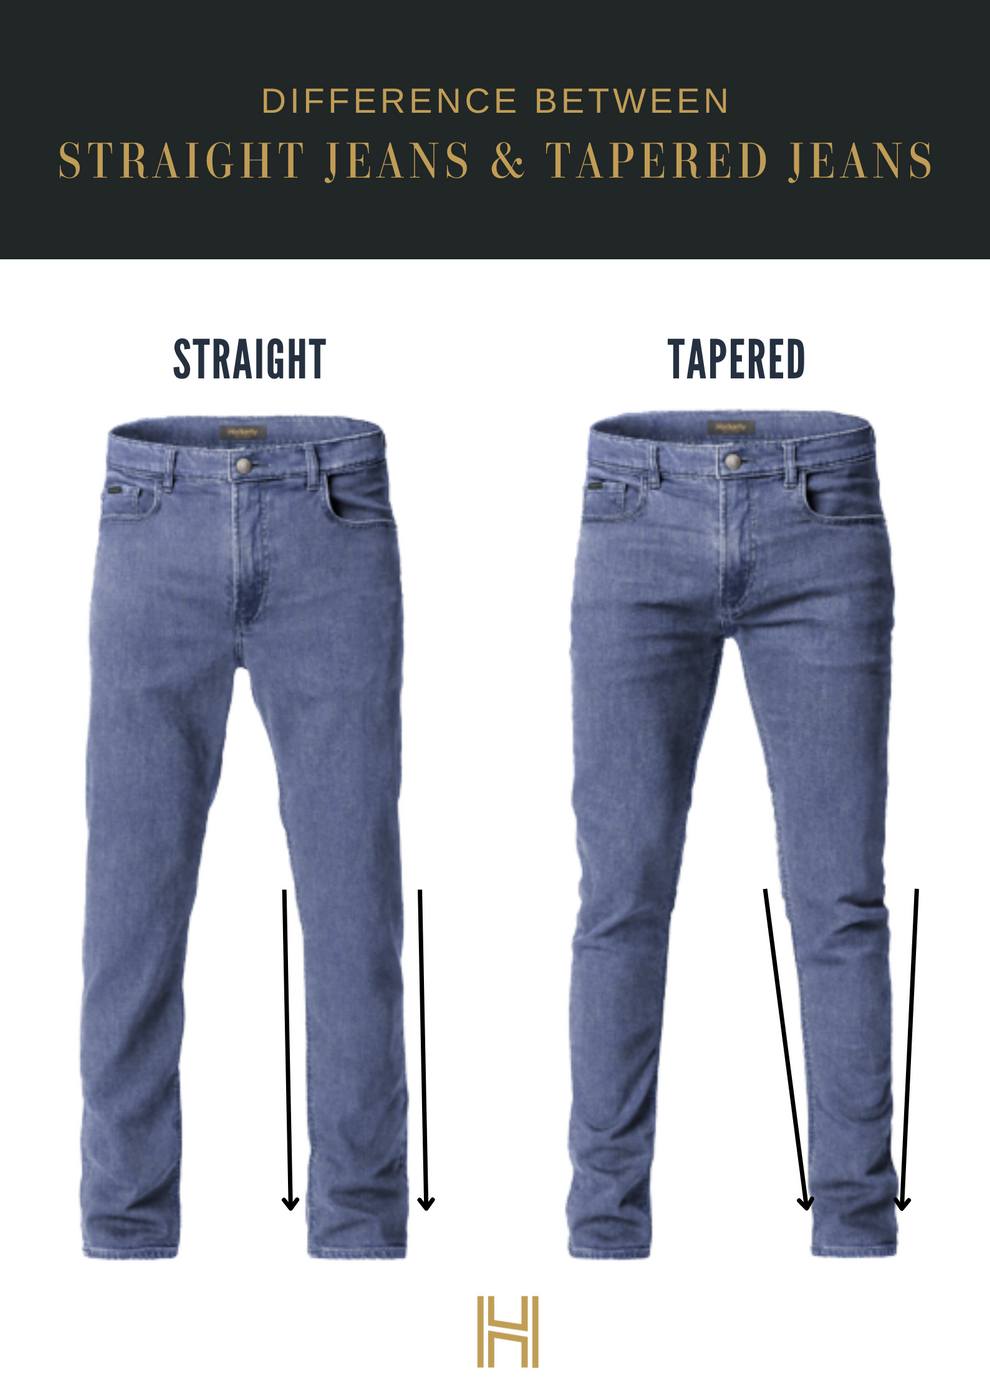 Tapered Jeans Guide: Style, Fit, & how to wear them - Hockerty